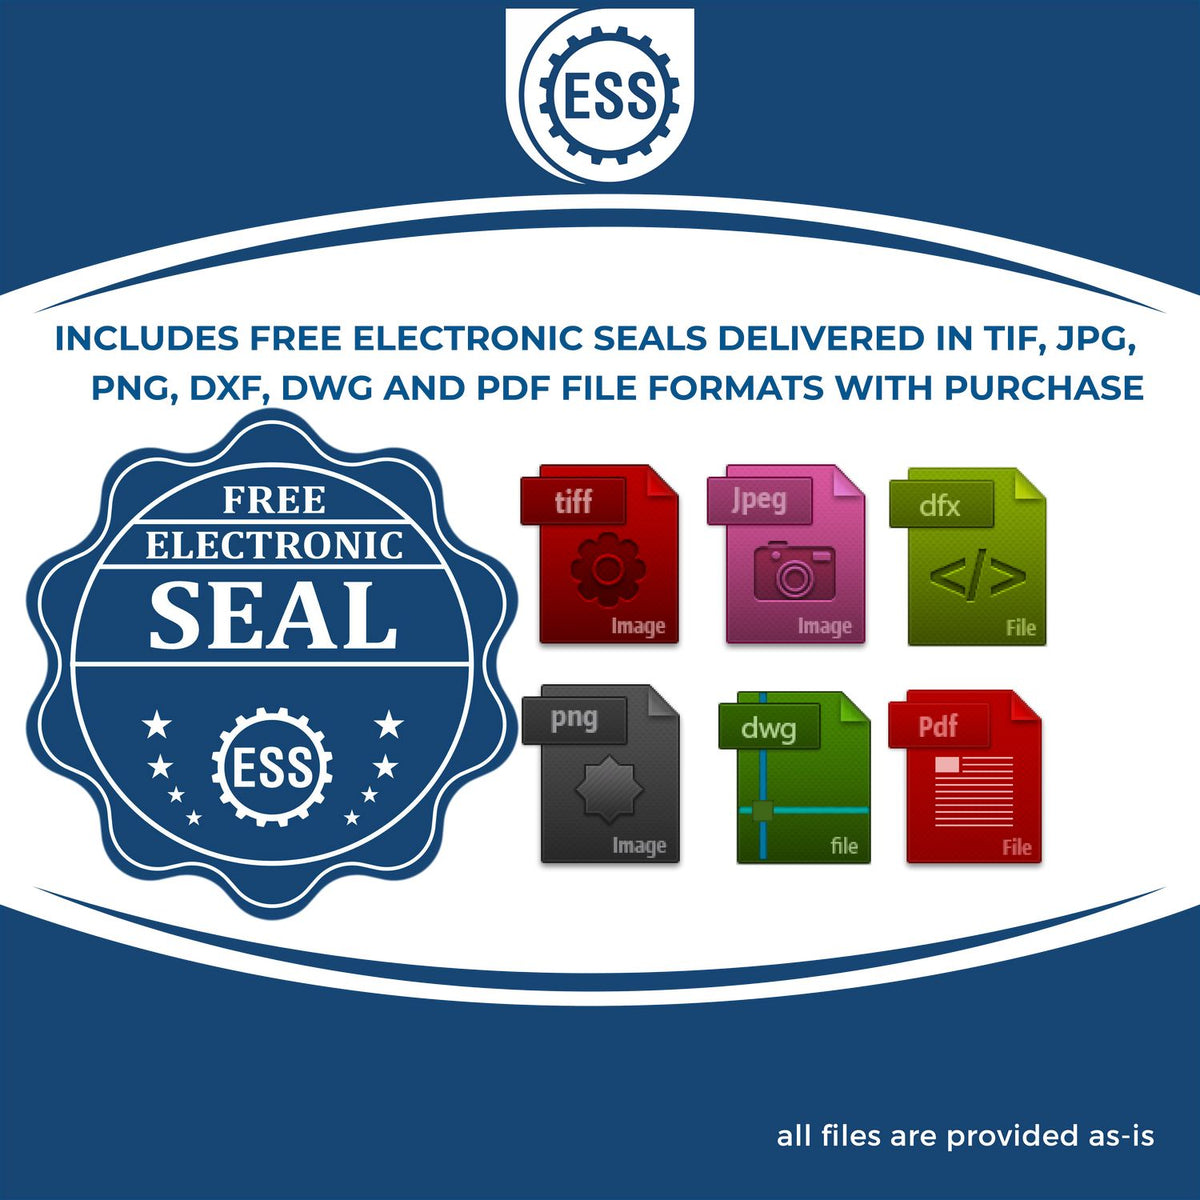 An infographic for the free electronic seal for the Soft Montana Professional Engineer Seal illustrating the different file type icons such as DXF, DWG, TIF, JPG and PNG.